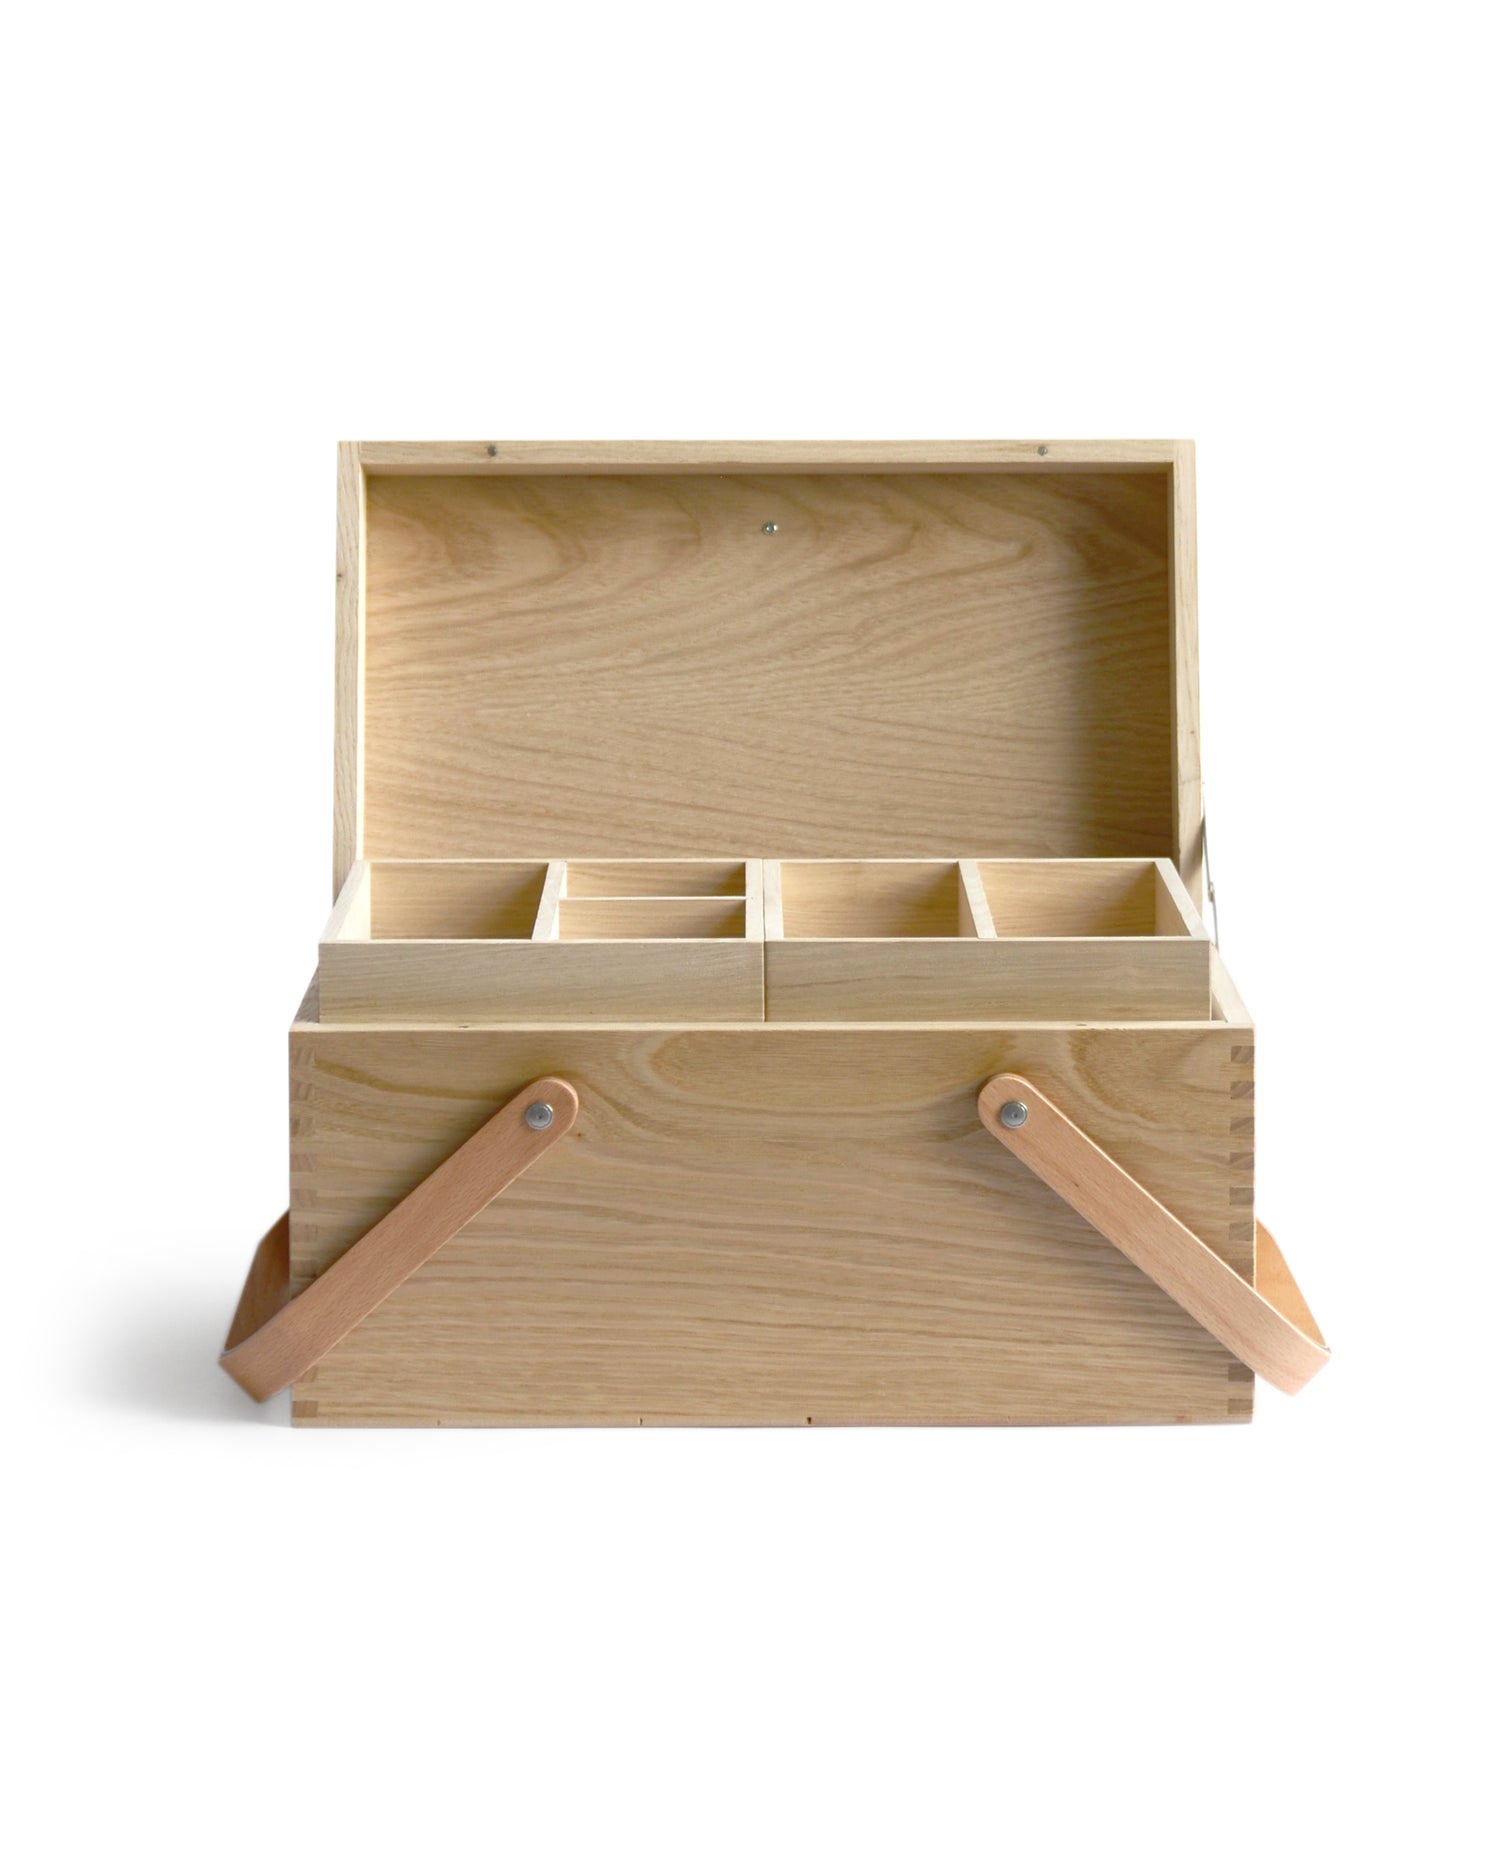 Silhouetted image of  open chestnut wood picnic box featuring wood joinery on edges by Shinsuke Tanabe against white background.